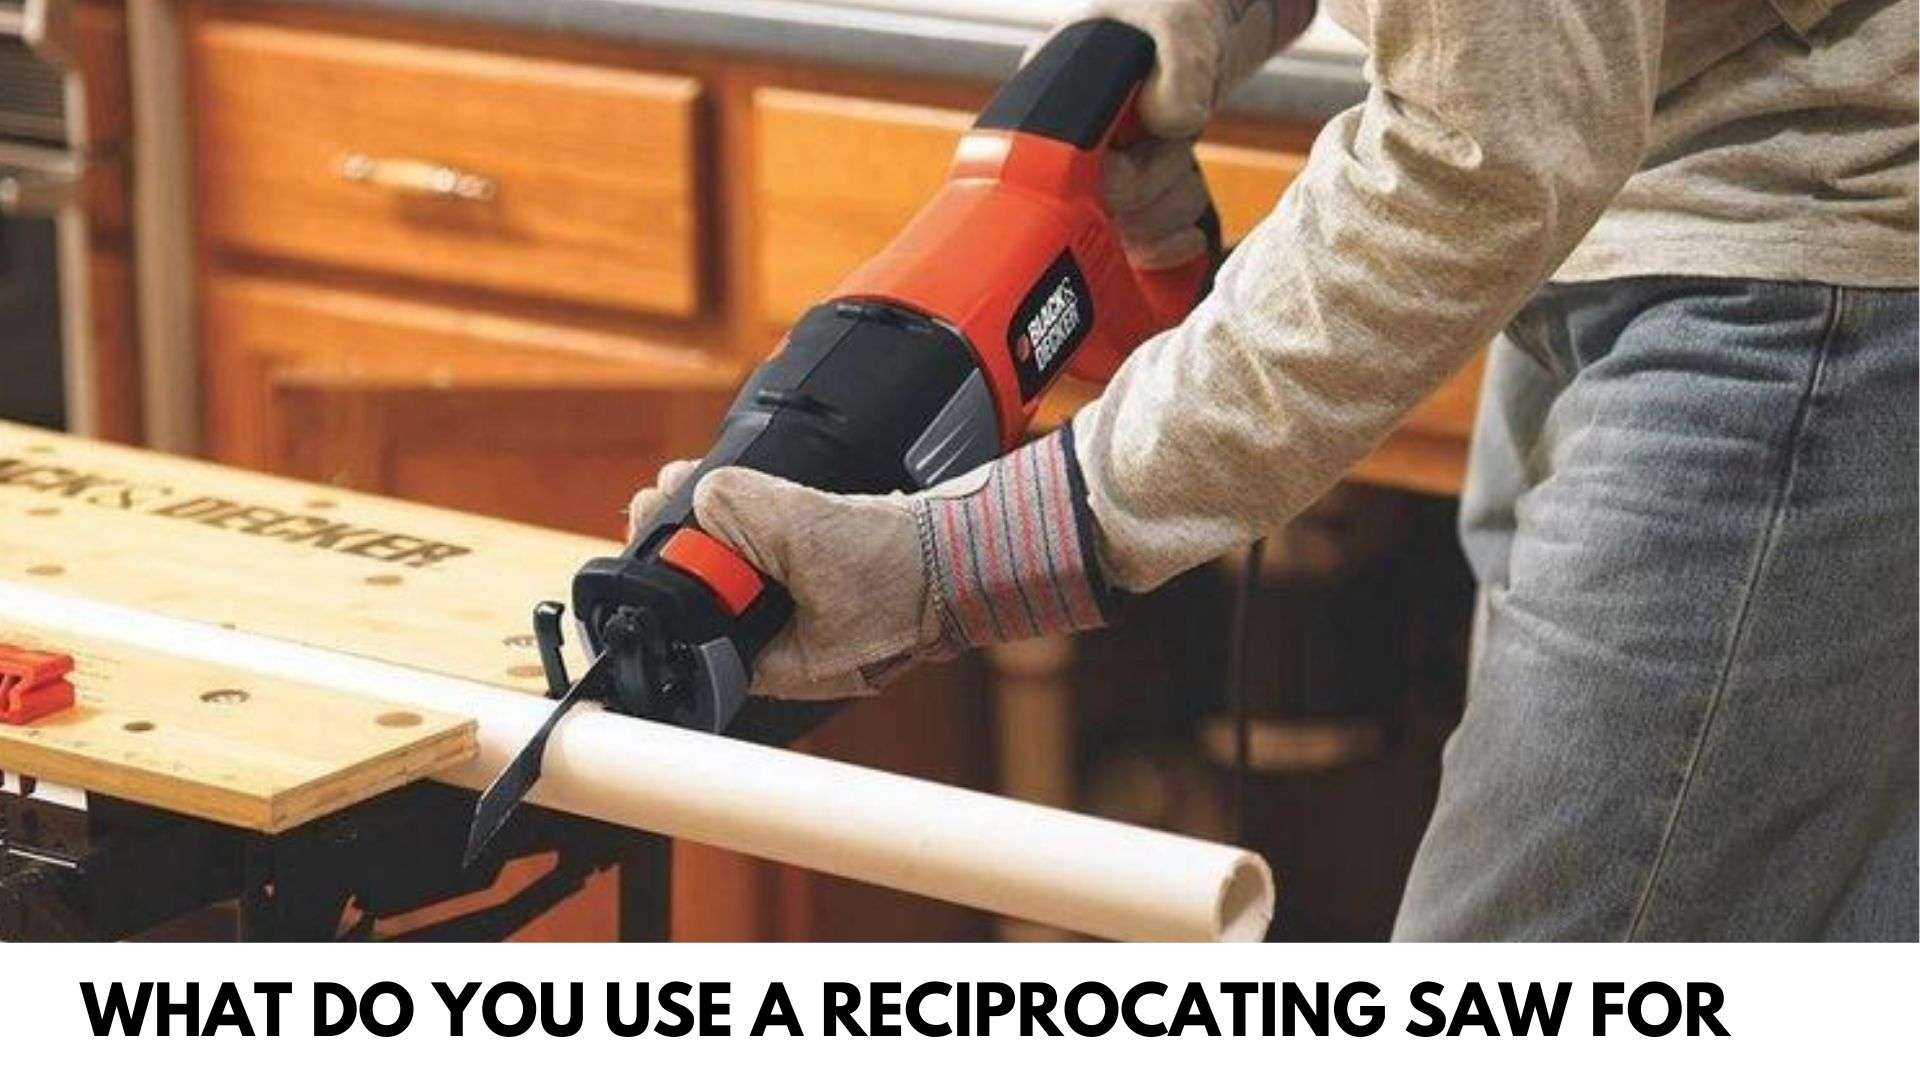 What Do You Use a Reciprocating Saw for